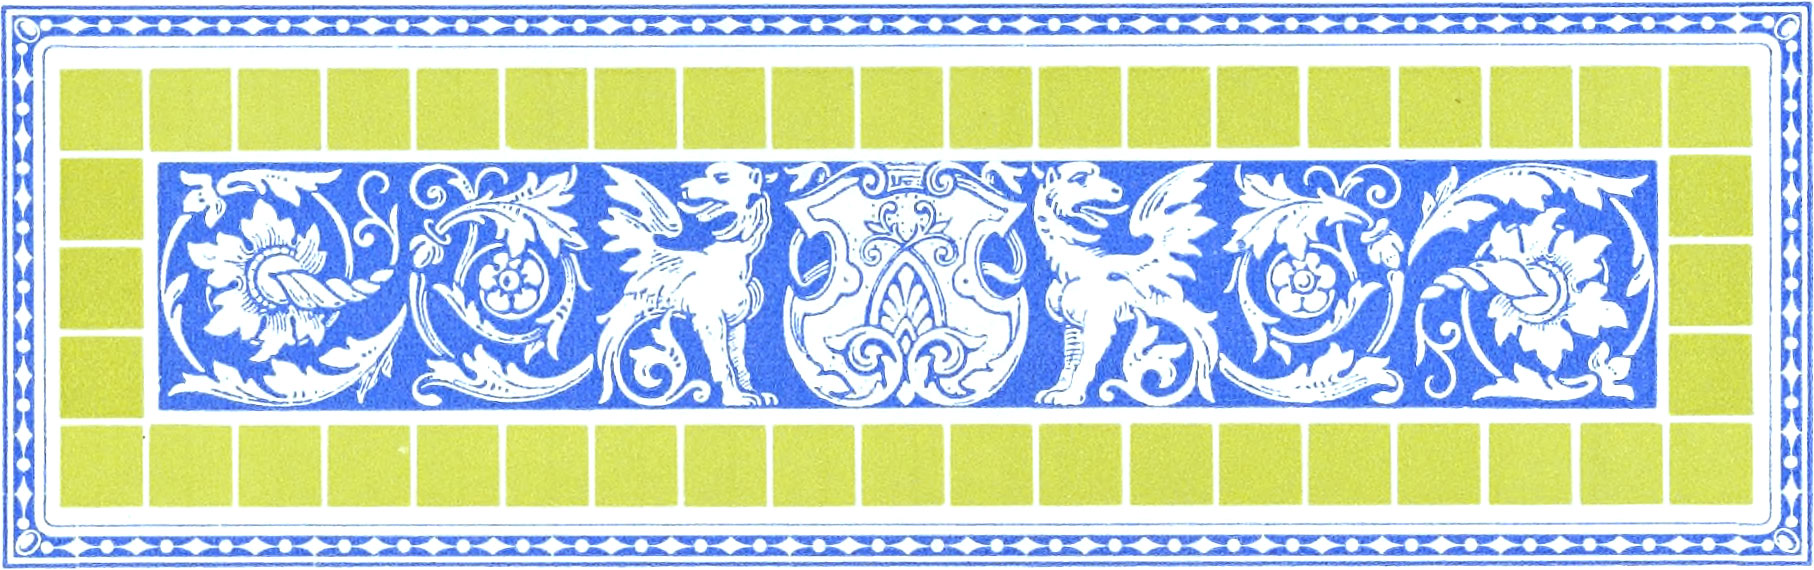 Ornate light blue horizontal graphic of griffins, a crest, and floral filigree bordered by green tiles and a blue border